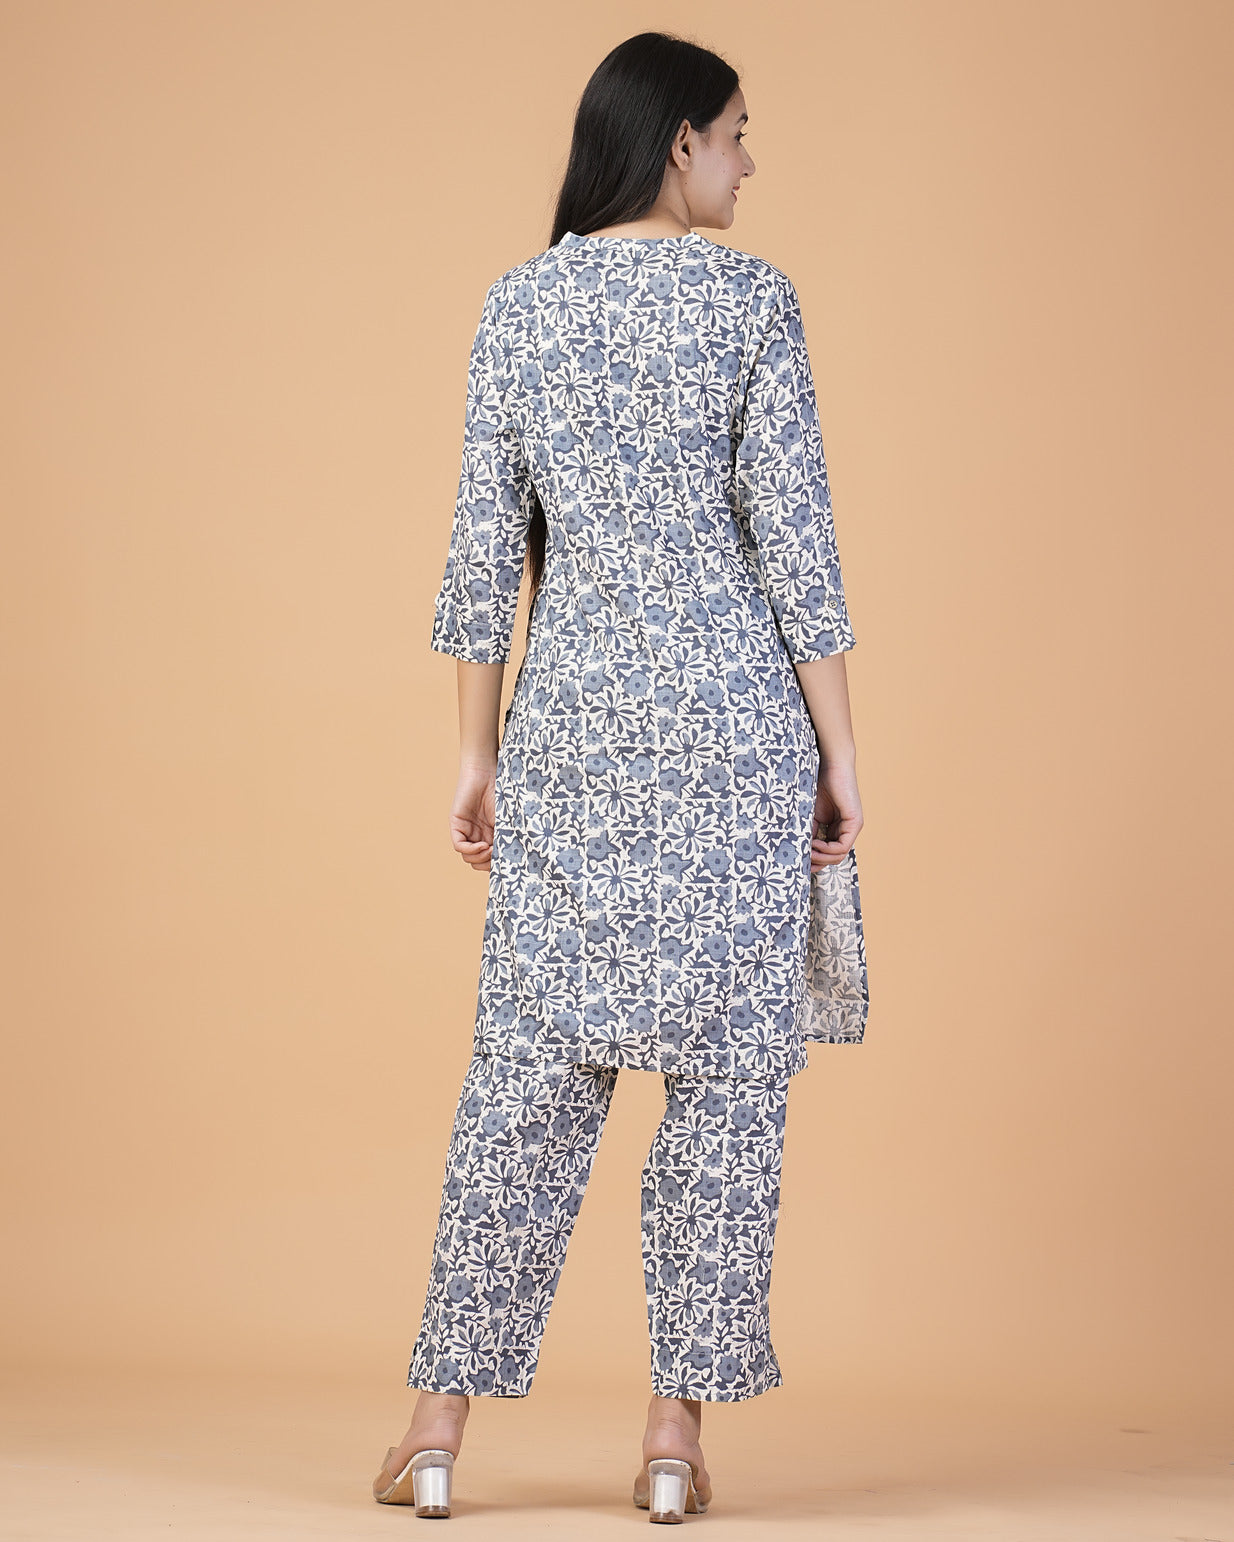 Blue Floral Printed with Silver Embroidery Cotton Kurti Set